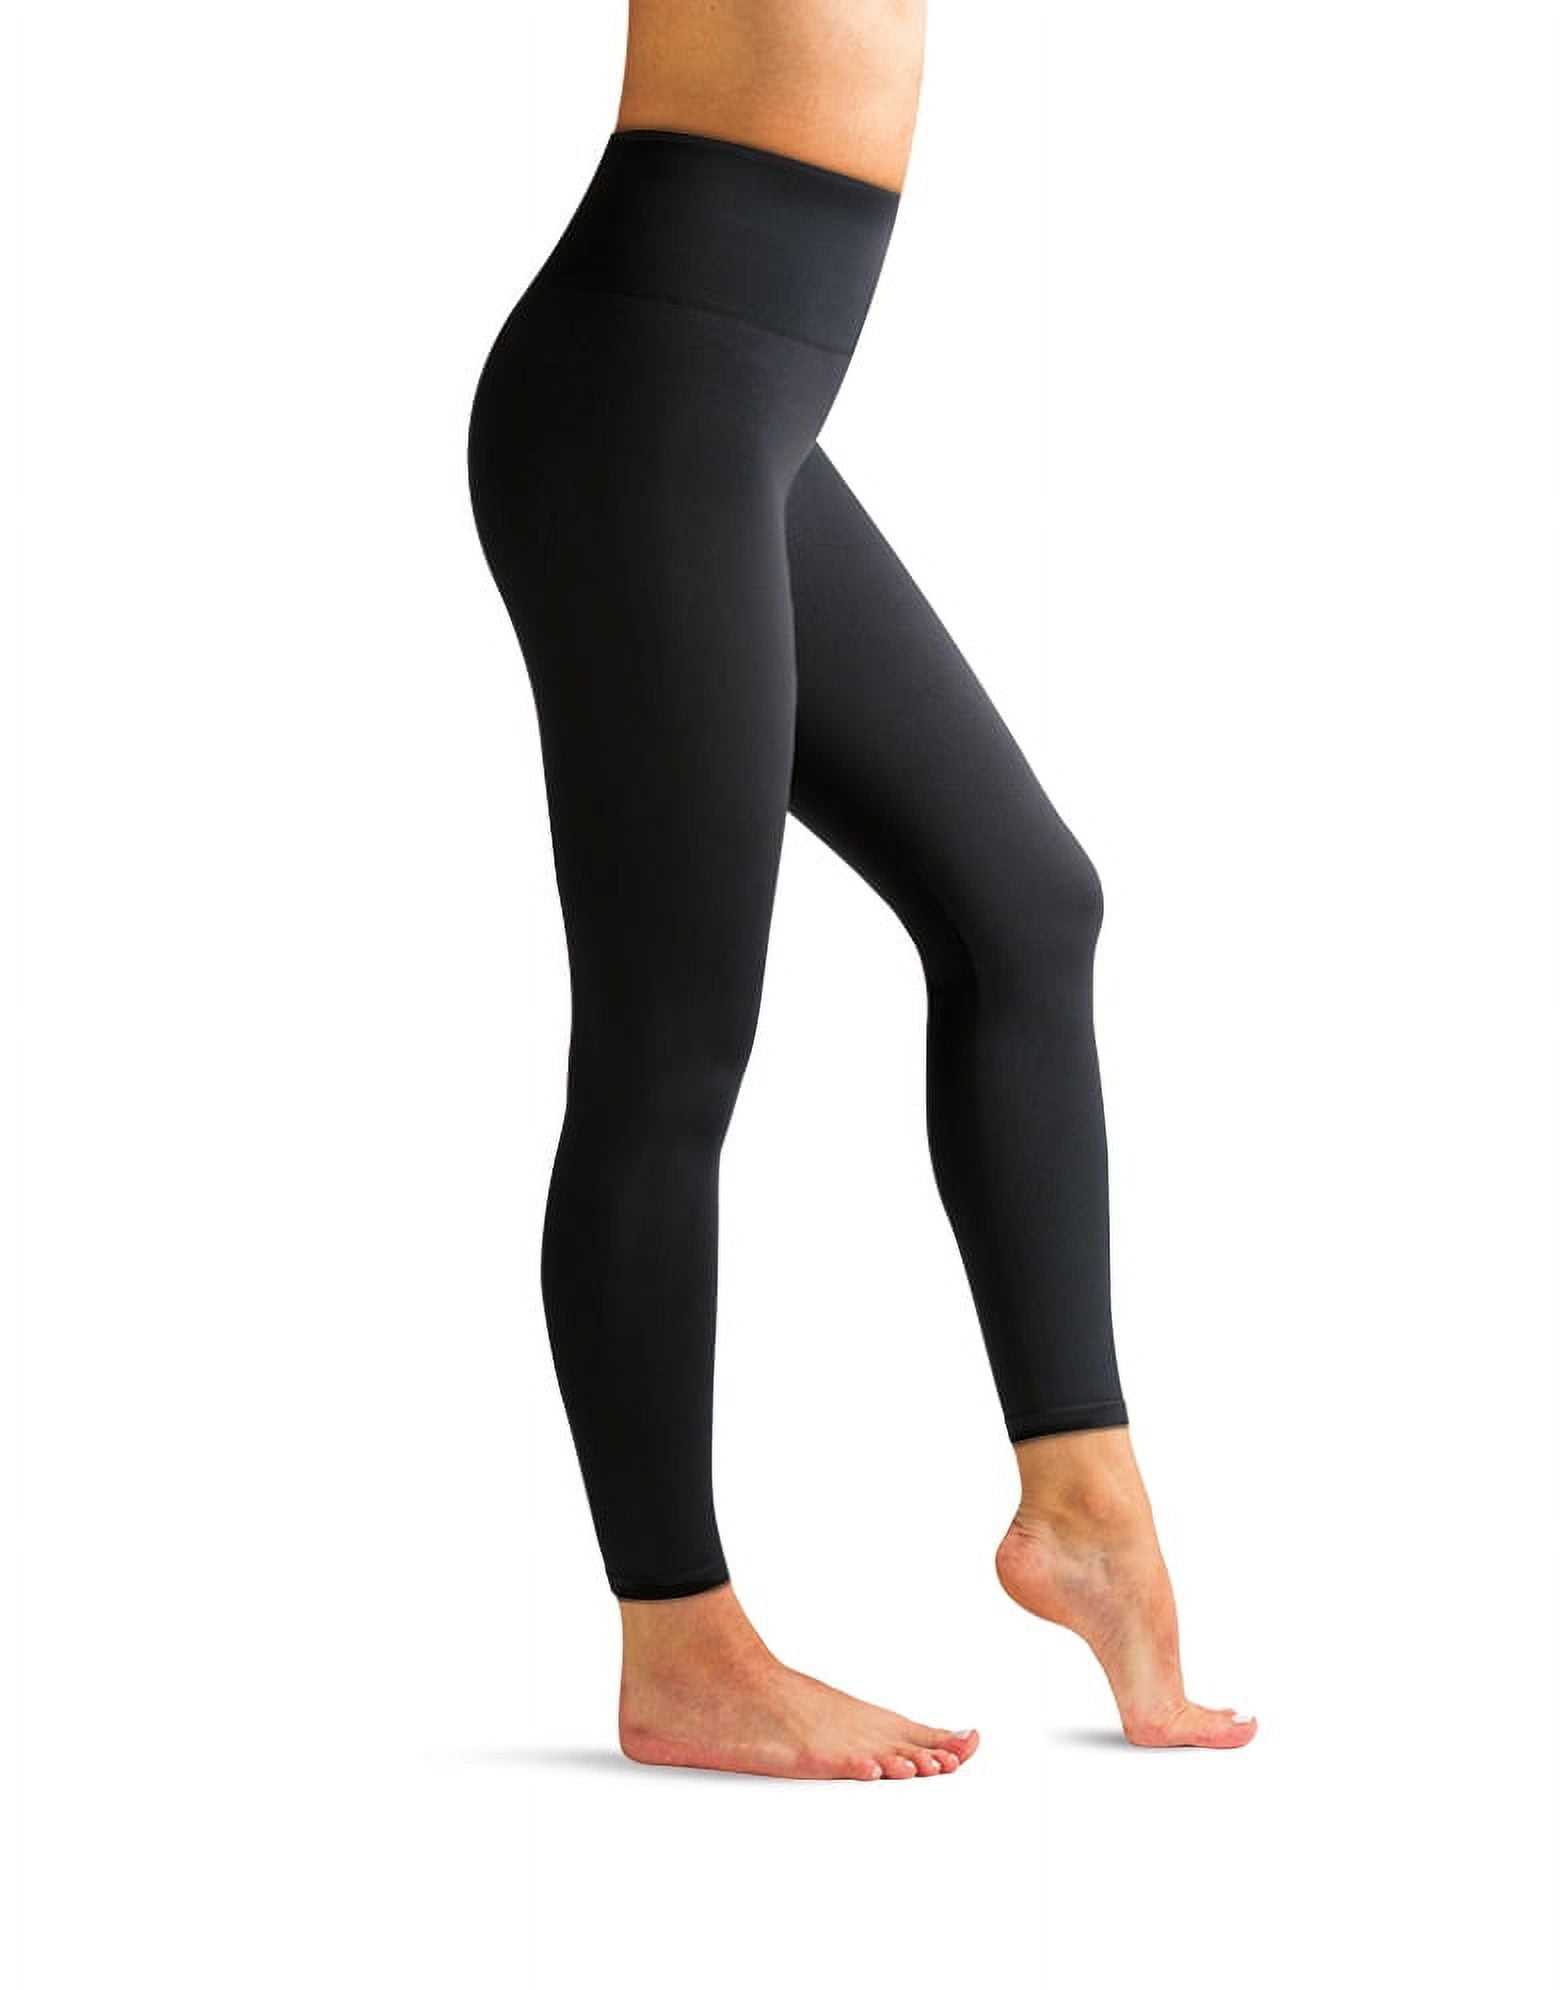 Harvard Seamless Leggings - High-waisted Compression By Maxxim Large :  Target